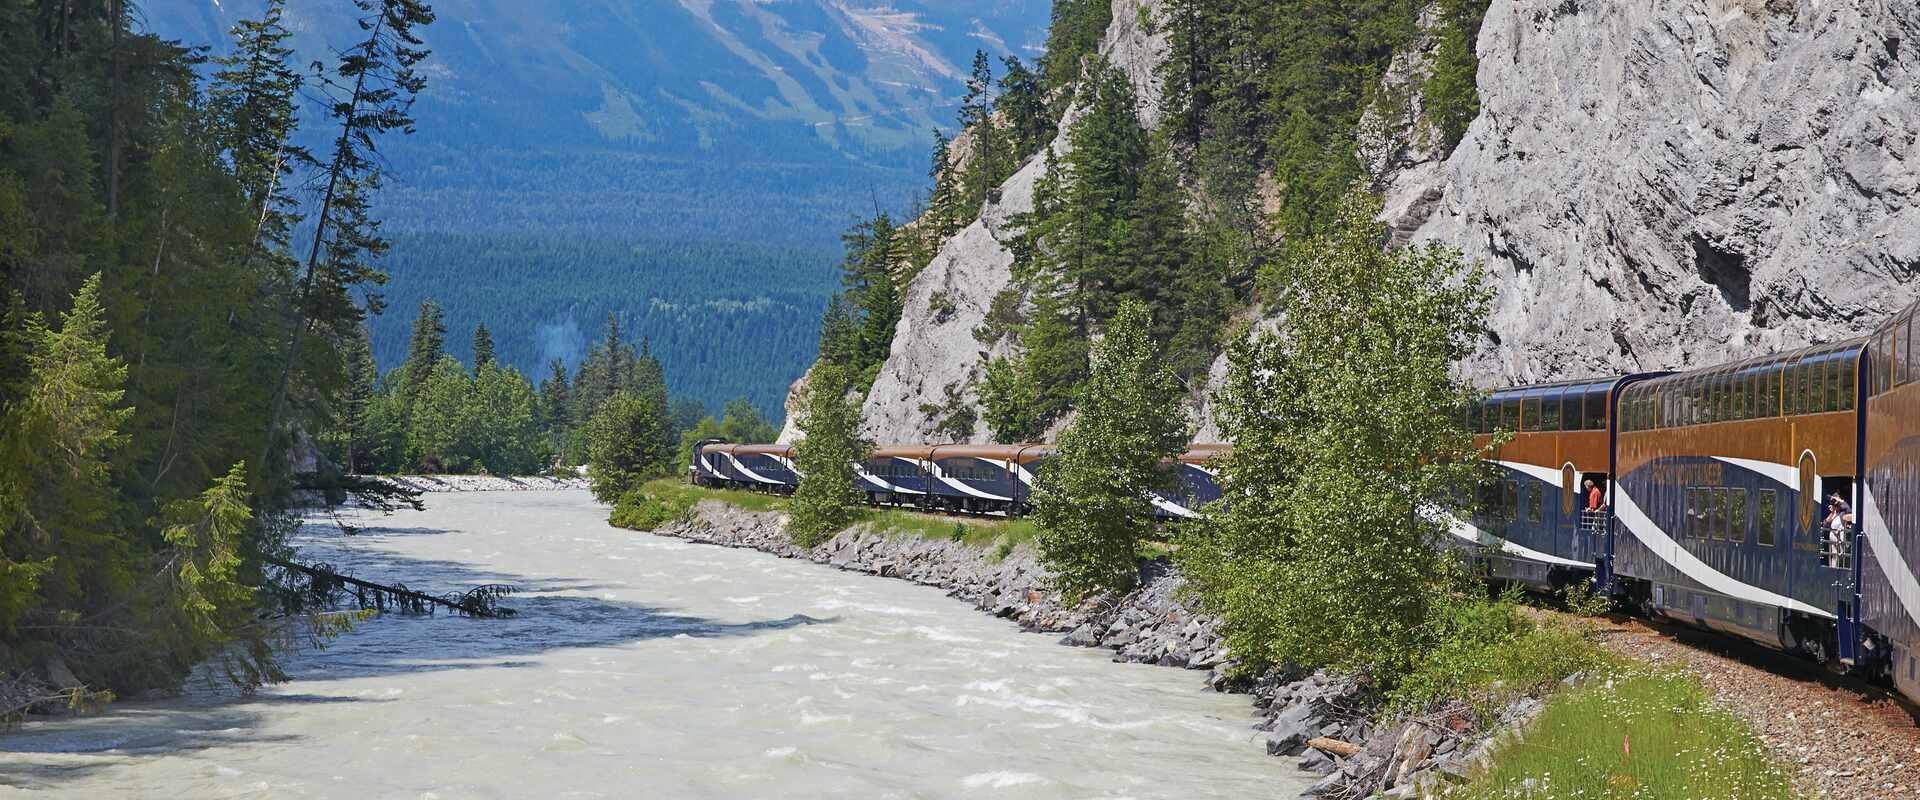 Rocky mountaineer next to a river with mountains in the background